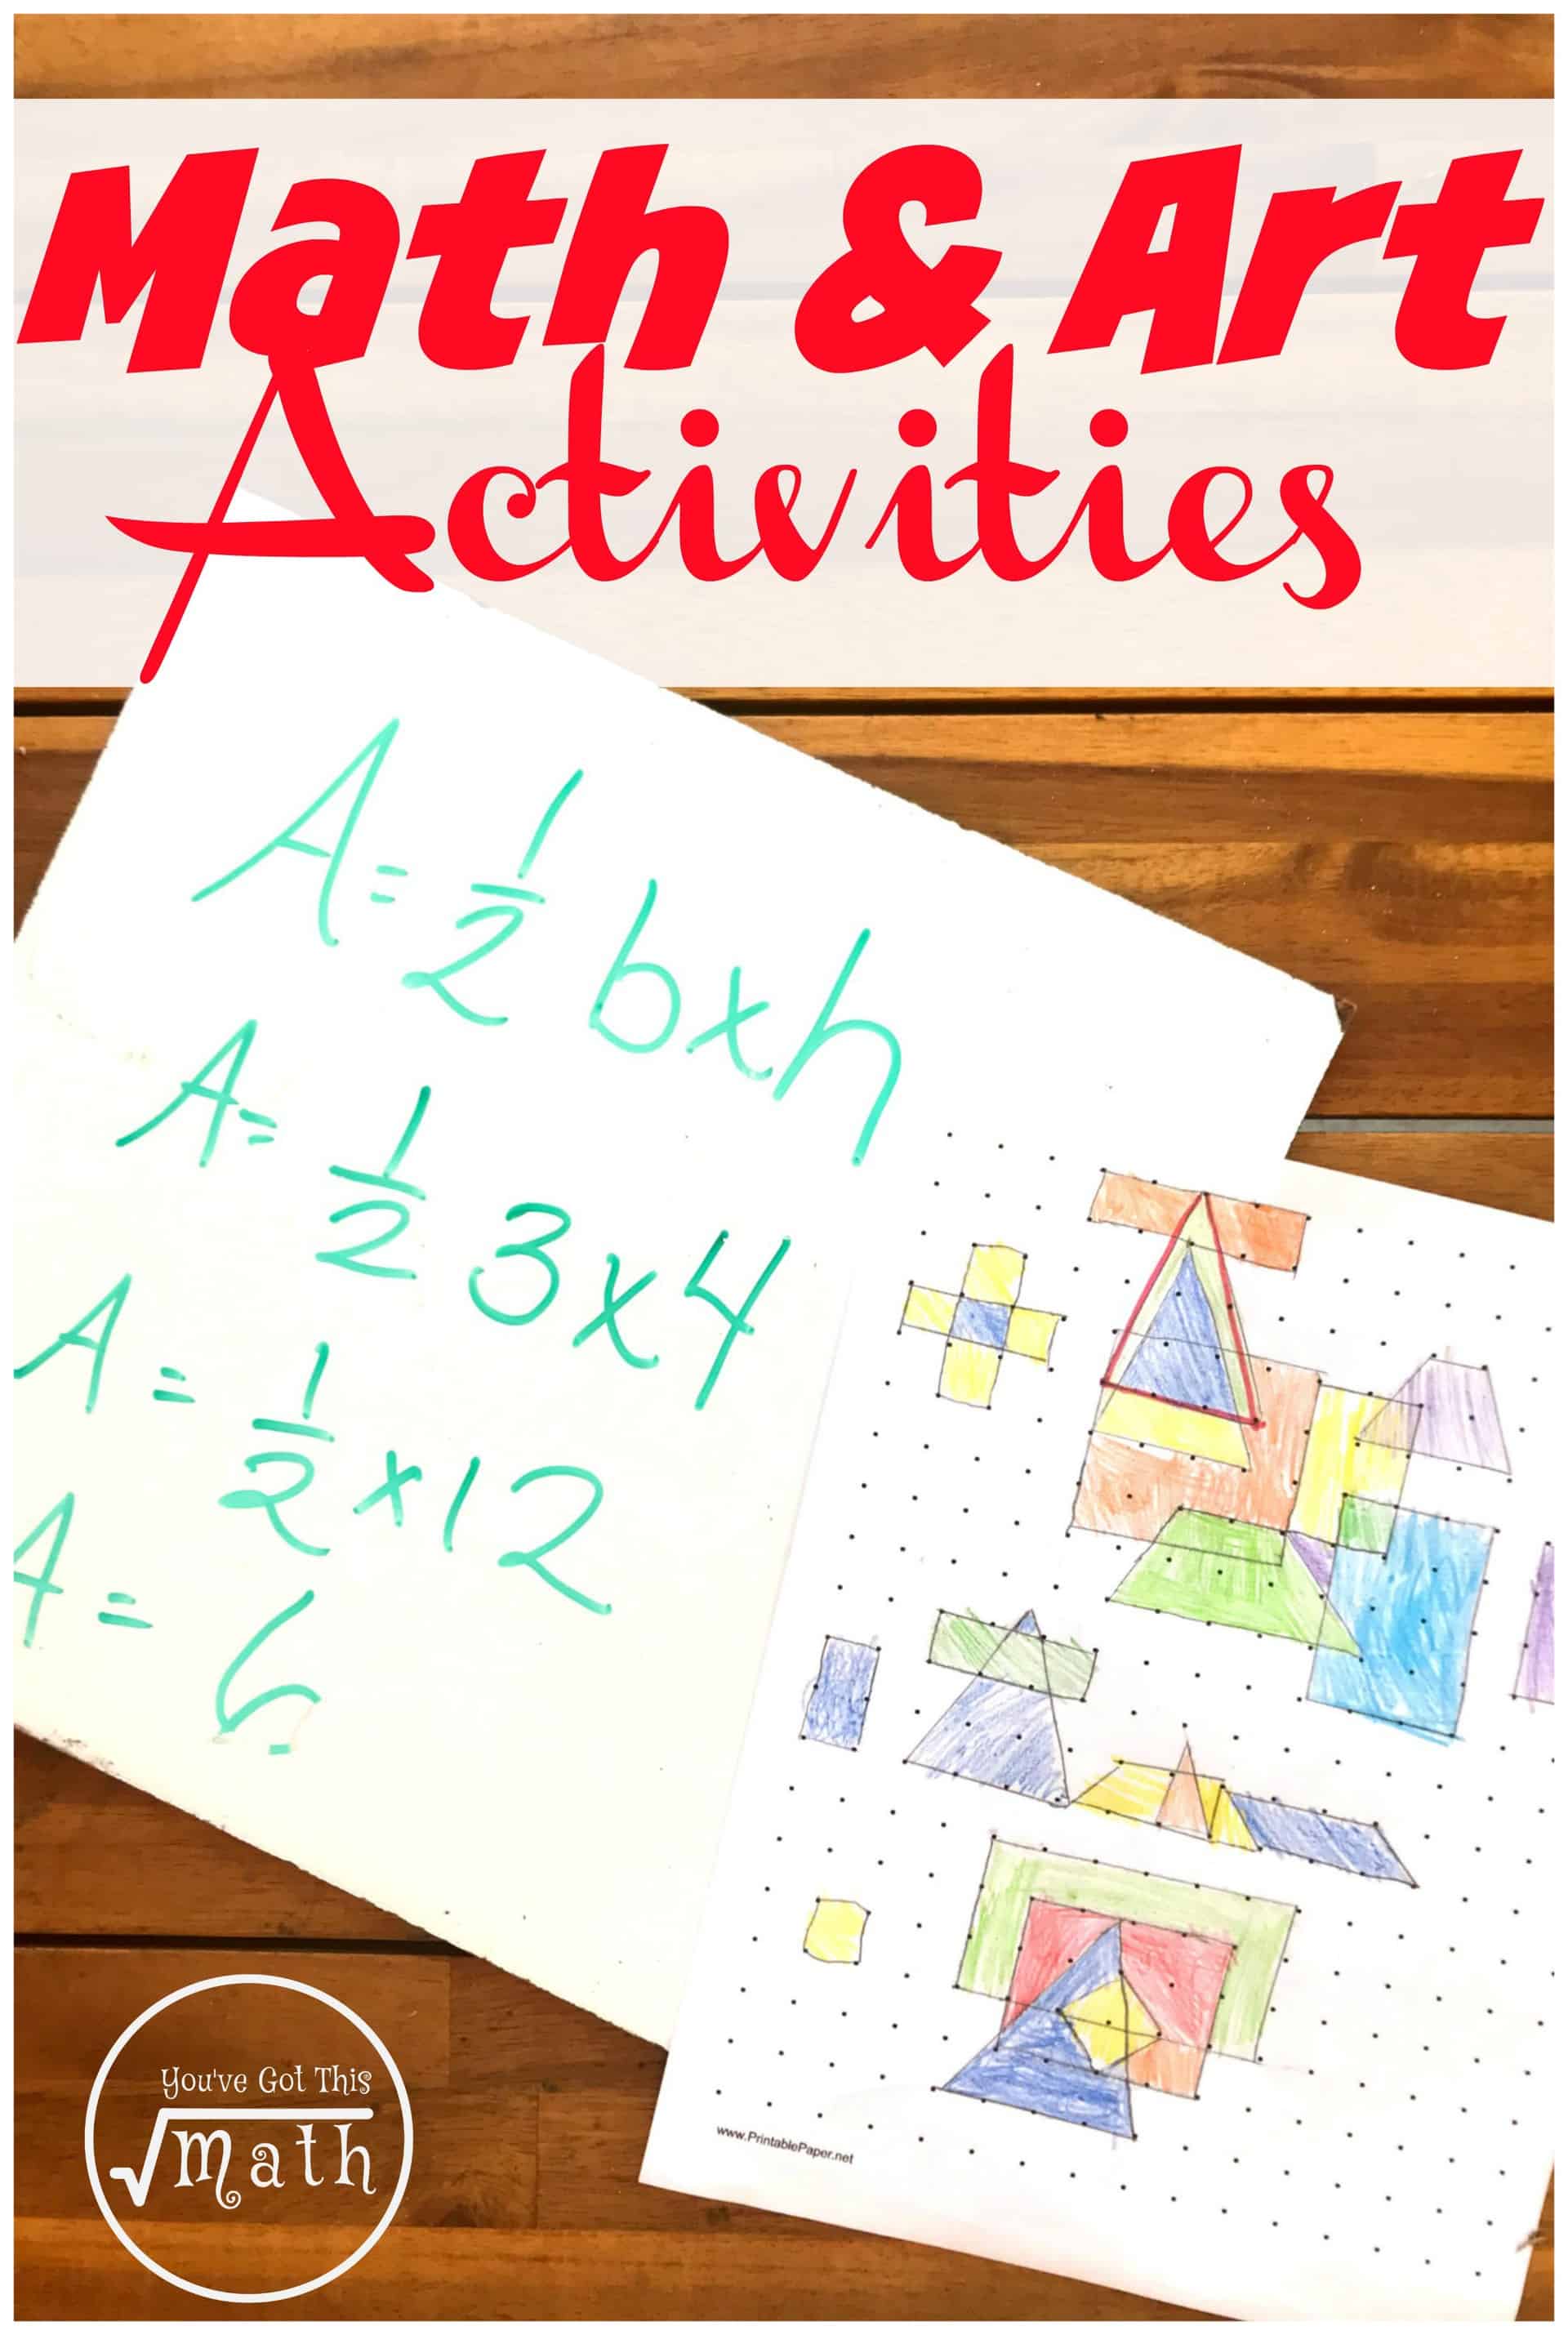 Area and perimeter art project worksheet with drawings of shapes and equations. 